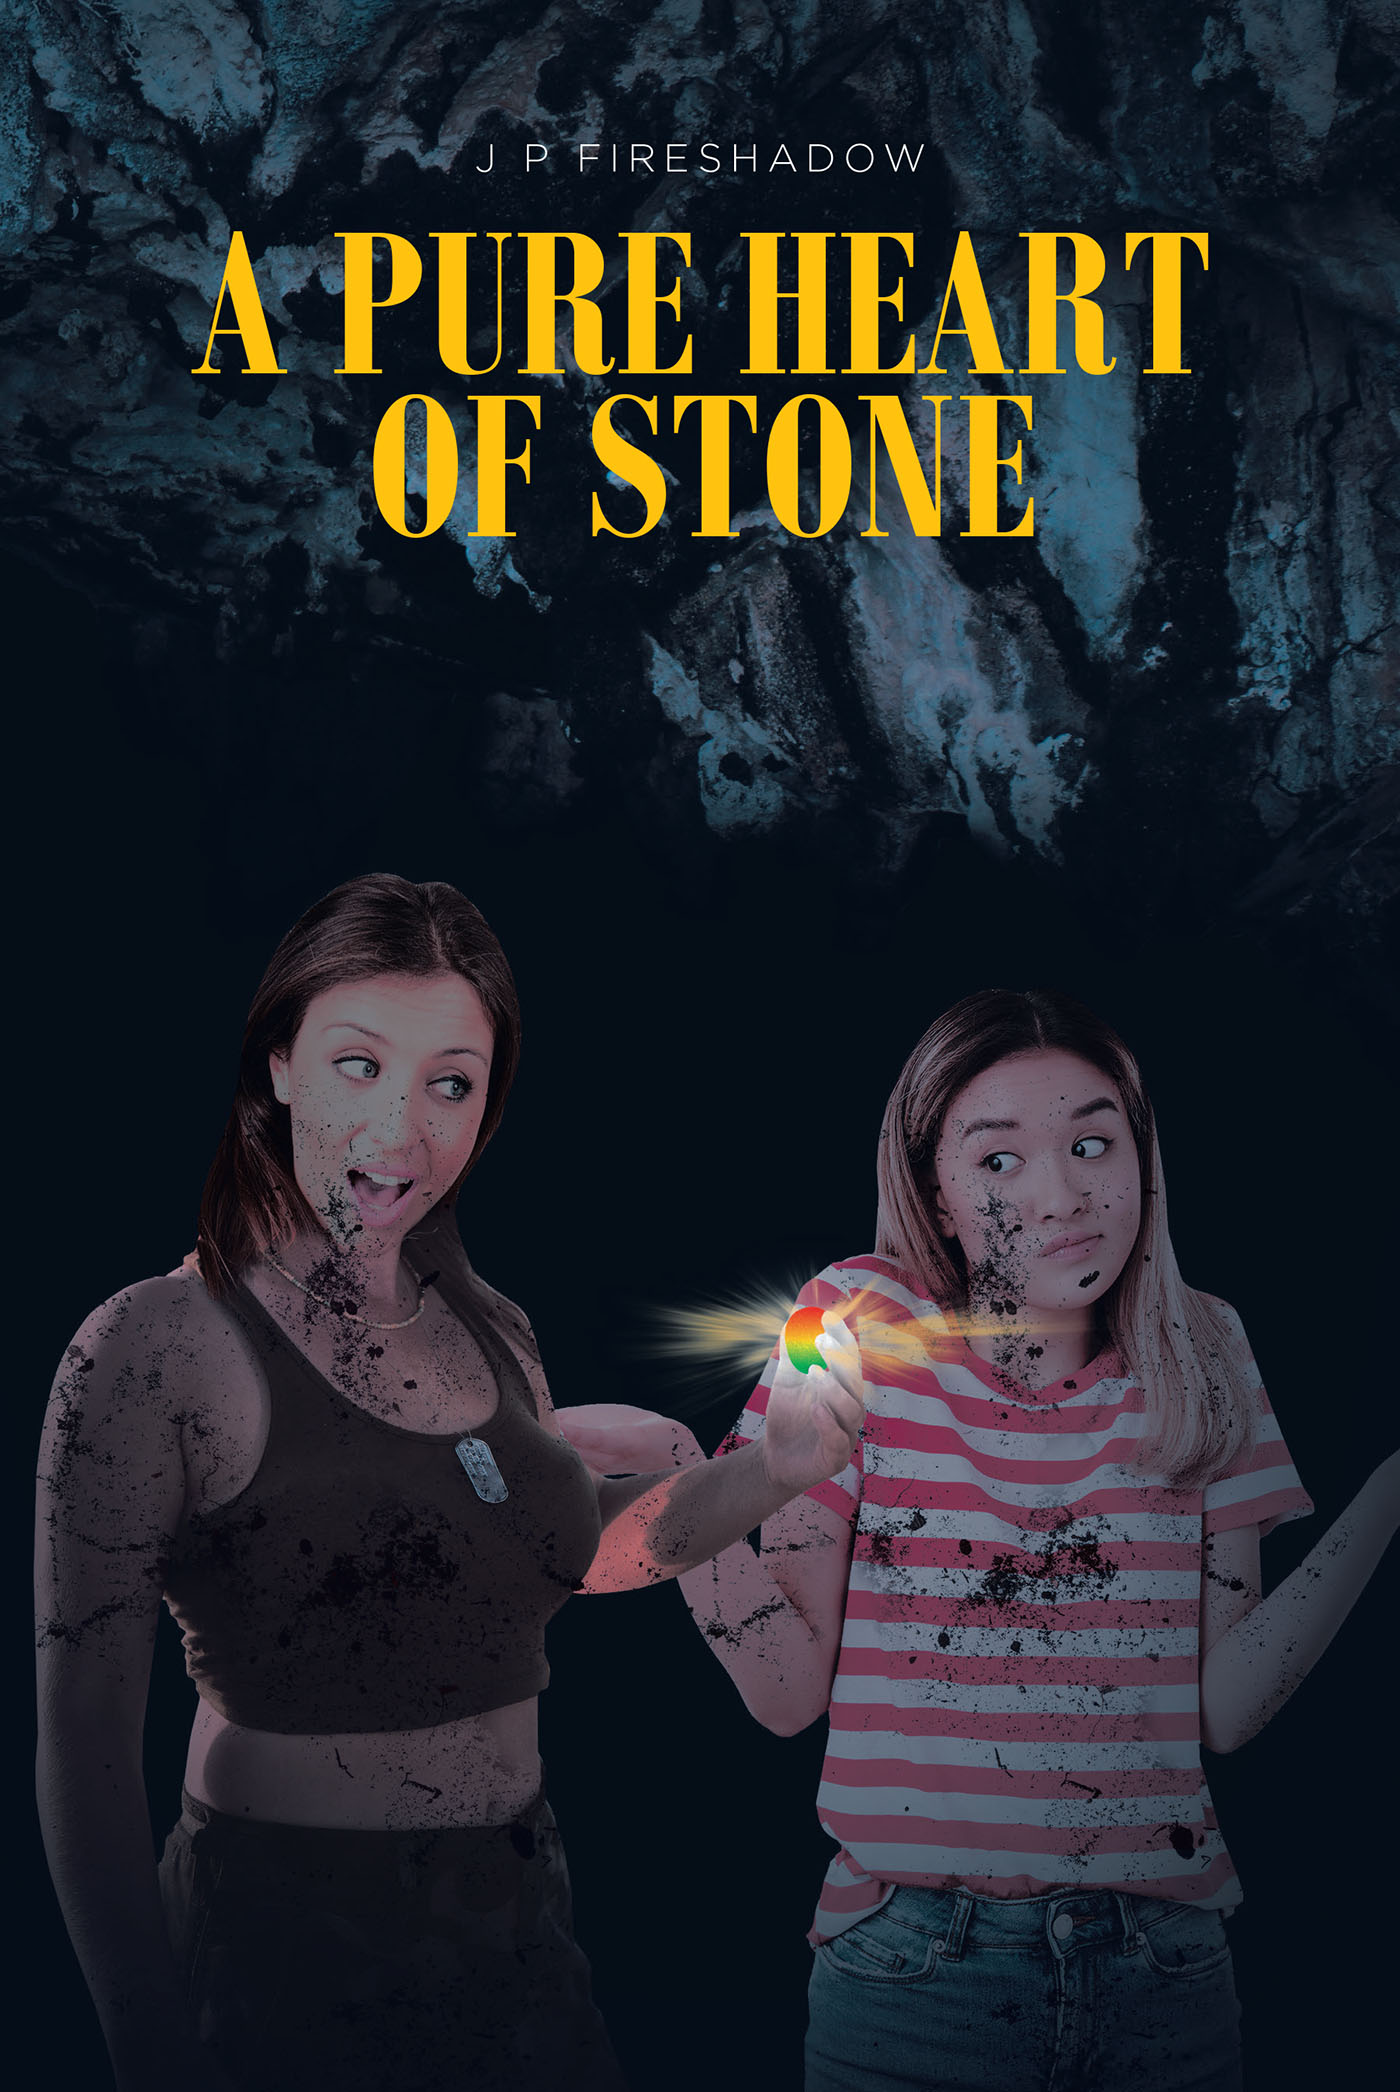 J P Fireshadow’s New Book, “A Pure Heart of Stone,” is a Compelling Tale of One Woman's Unending Quest to Keep a Powerful Stone Safe and Out of the Wrong Hands